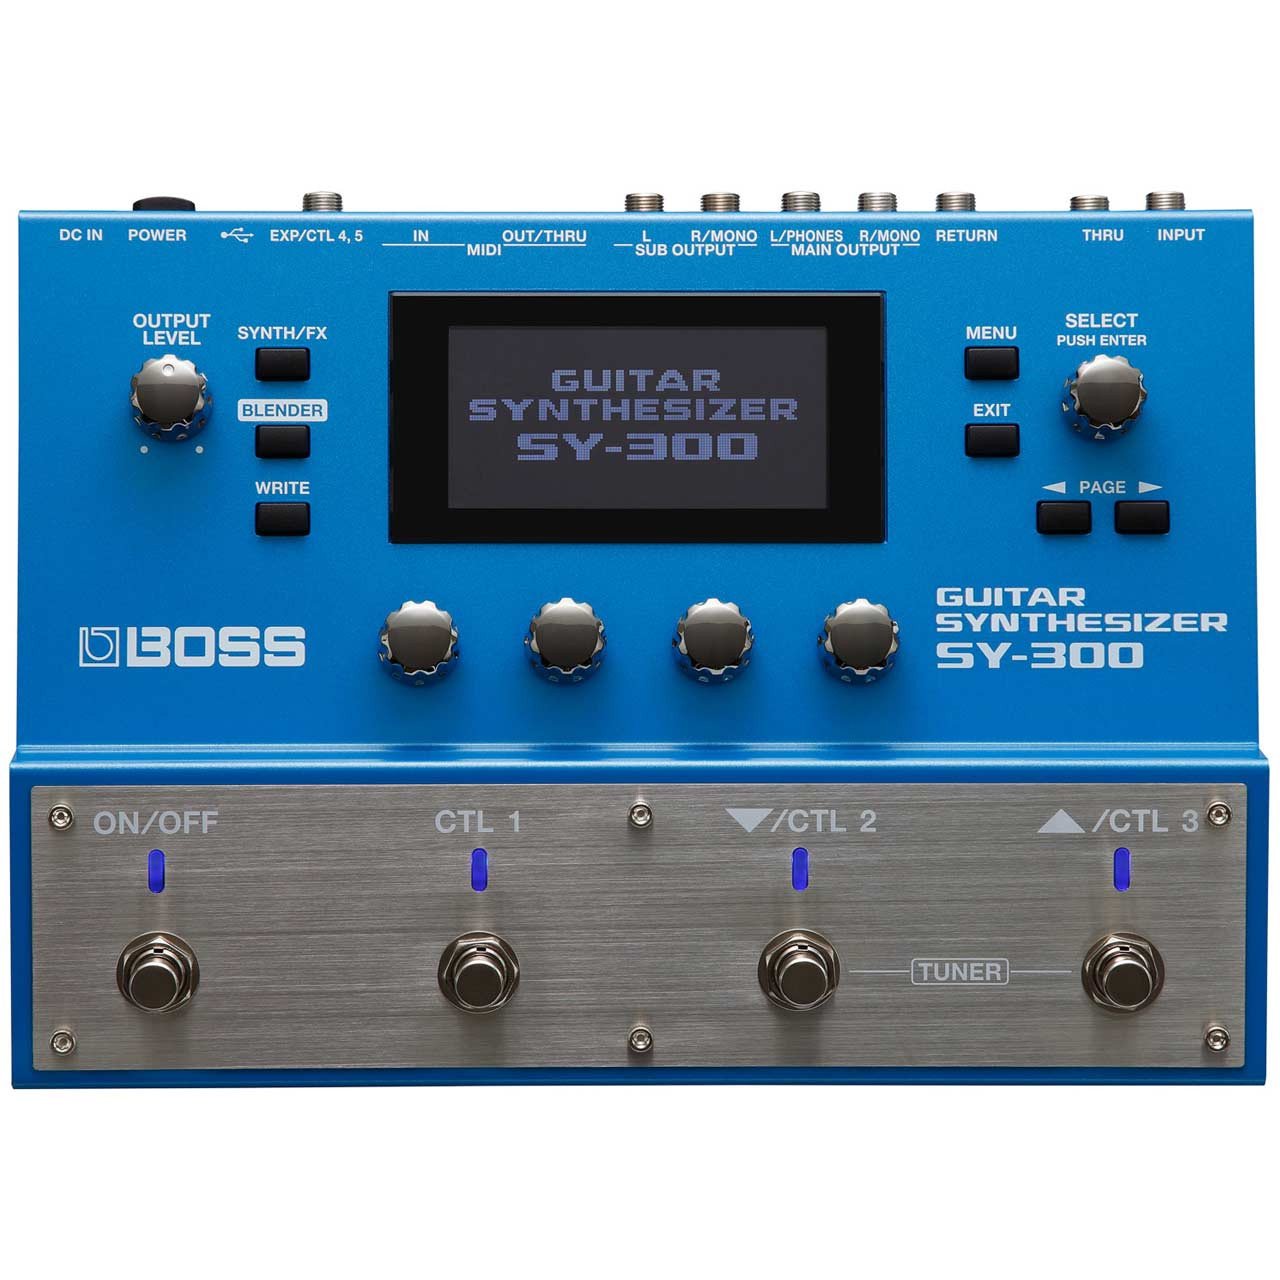 Pedals & Effects - BOSS SY-300 Guitar Synthesizer